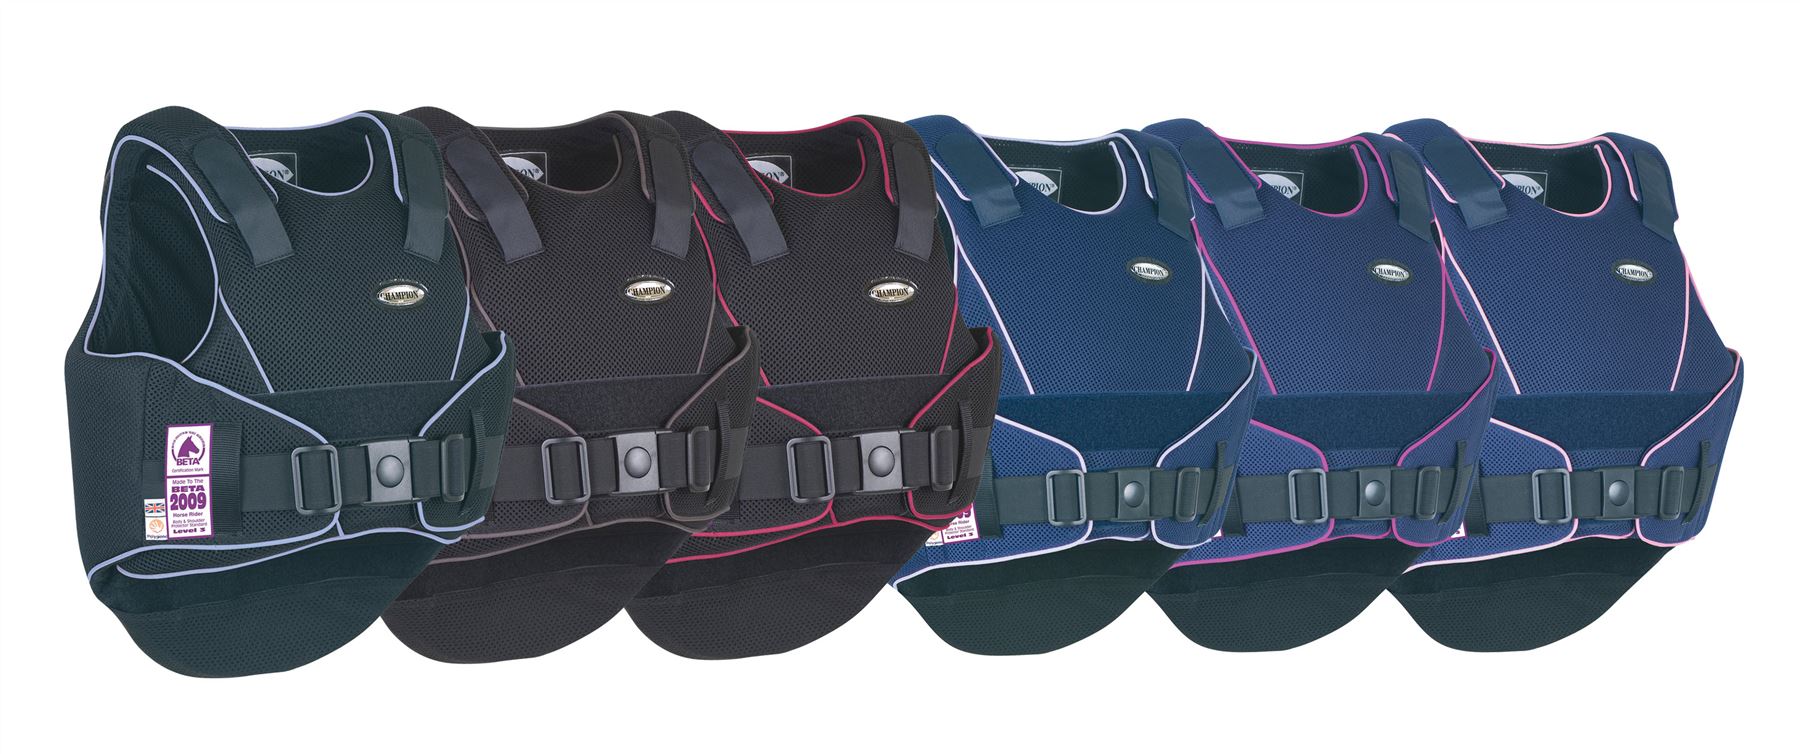 Champion Flexair Childs Body Protector - Just Horse Riders